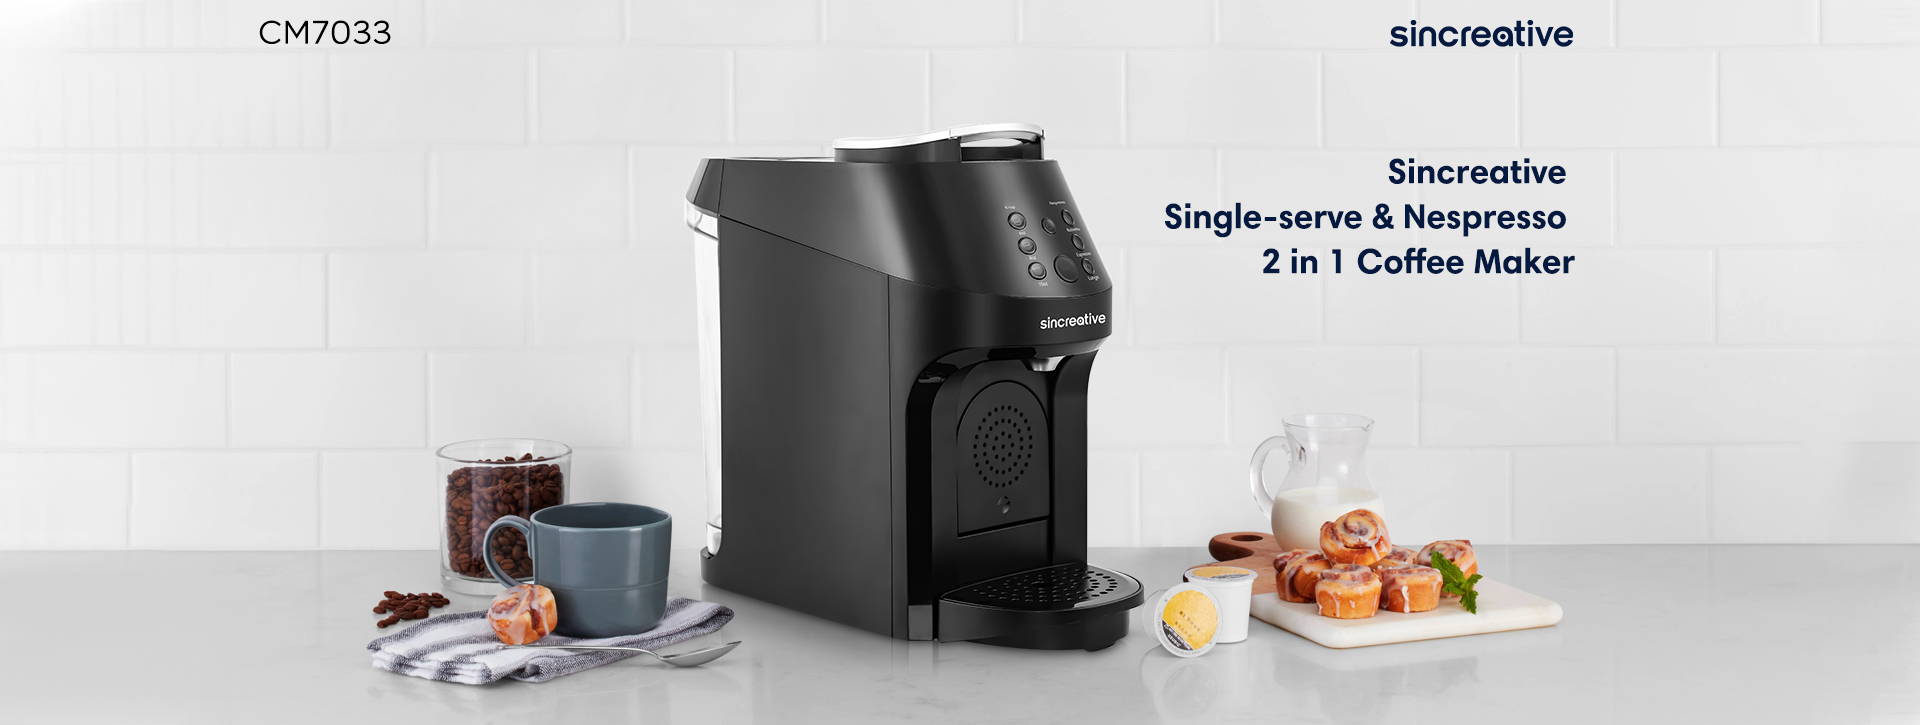 Sincreative kcup coffee maker with milk frother machine prepares all your favourite coffees and other hot beverages with compact design.